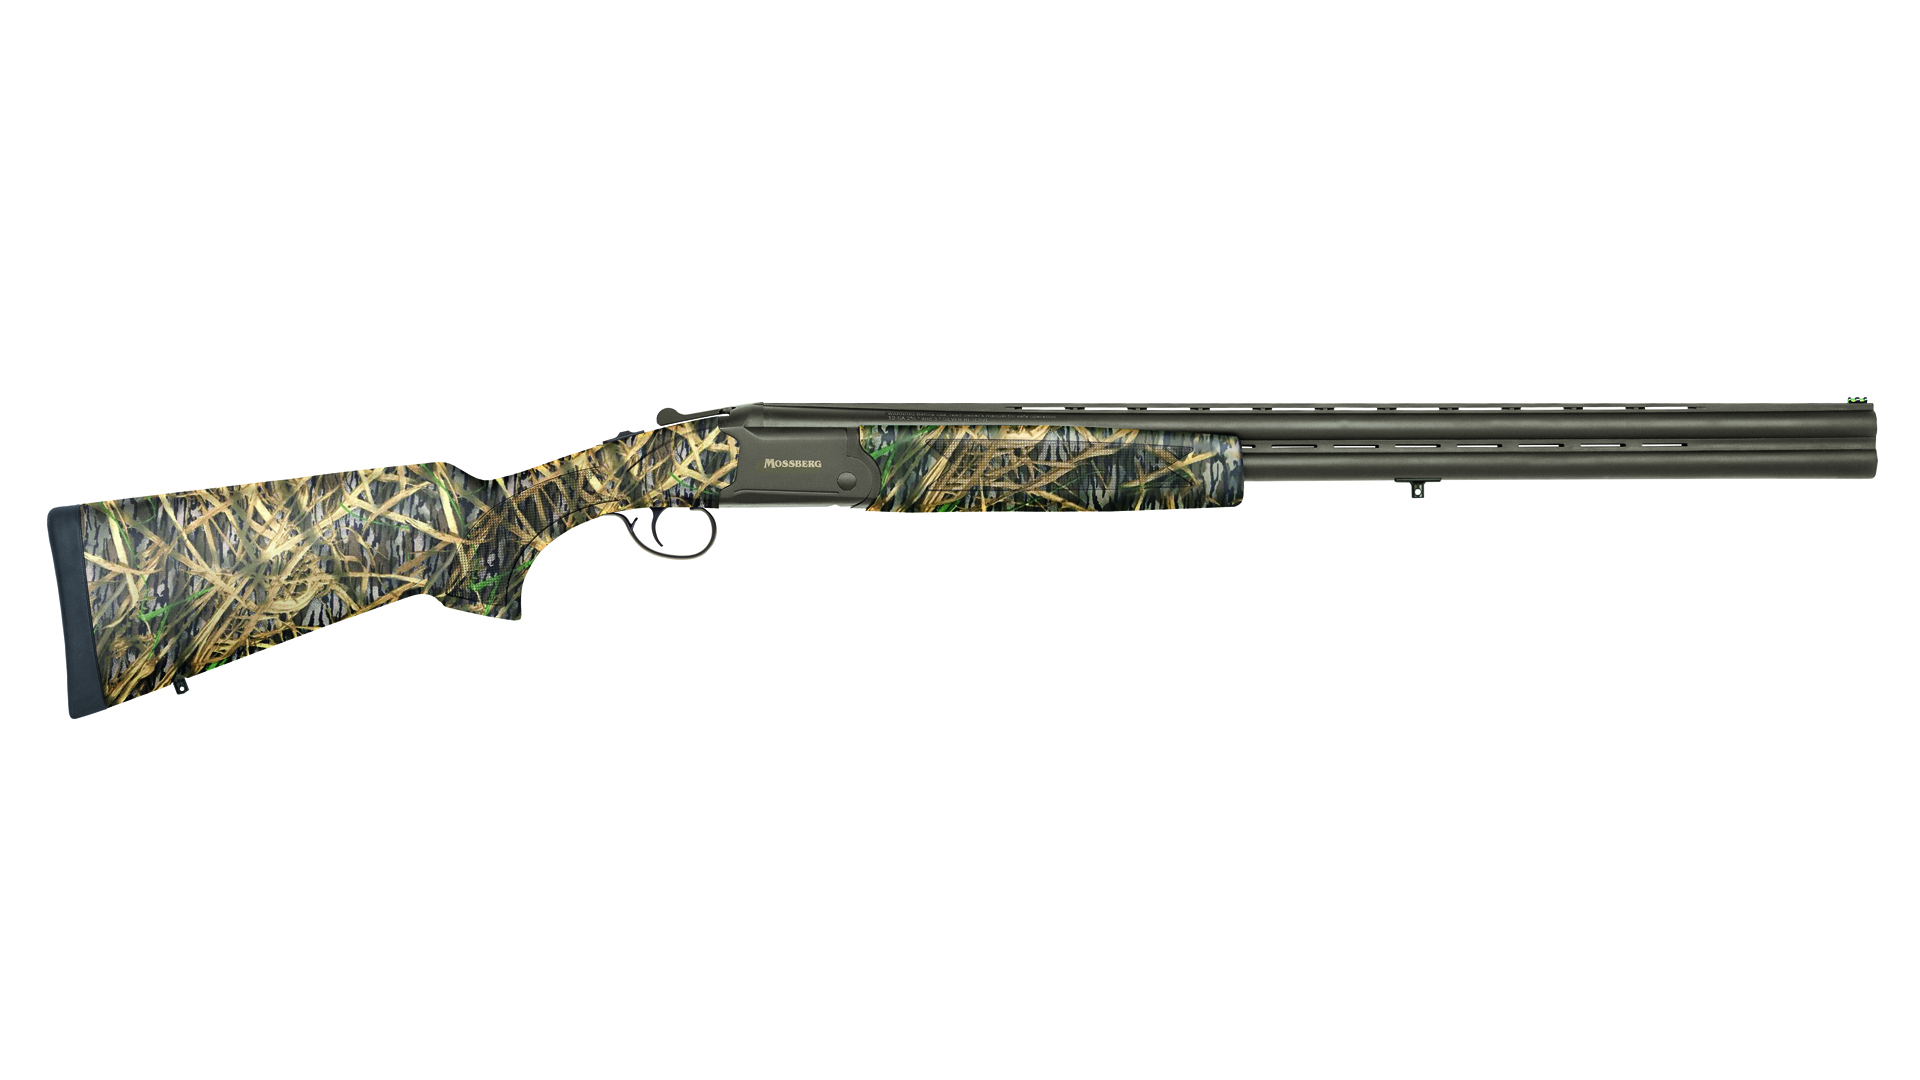 Mossberg Silver Reserve Waterfowl shotgun with a camouflage finish.